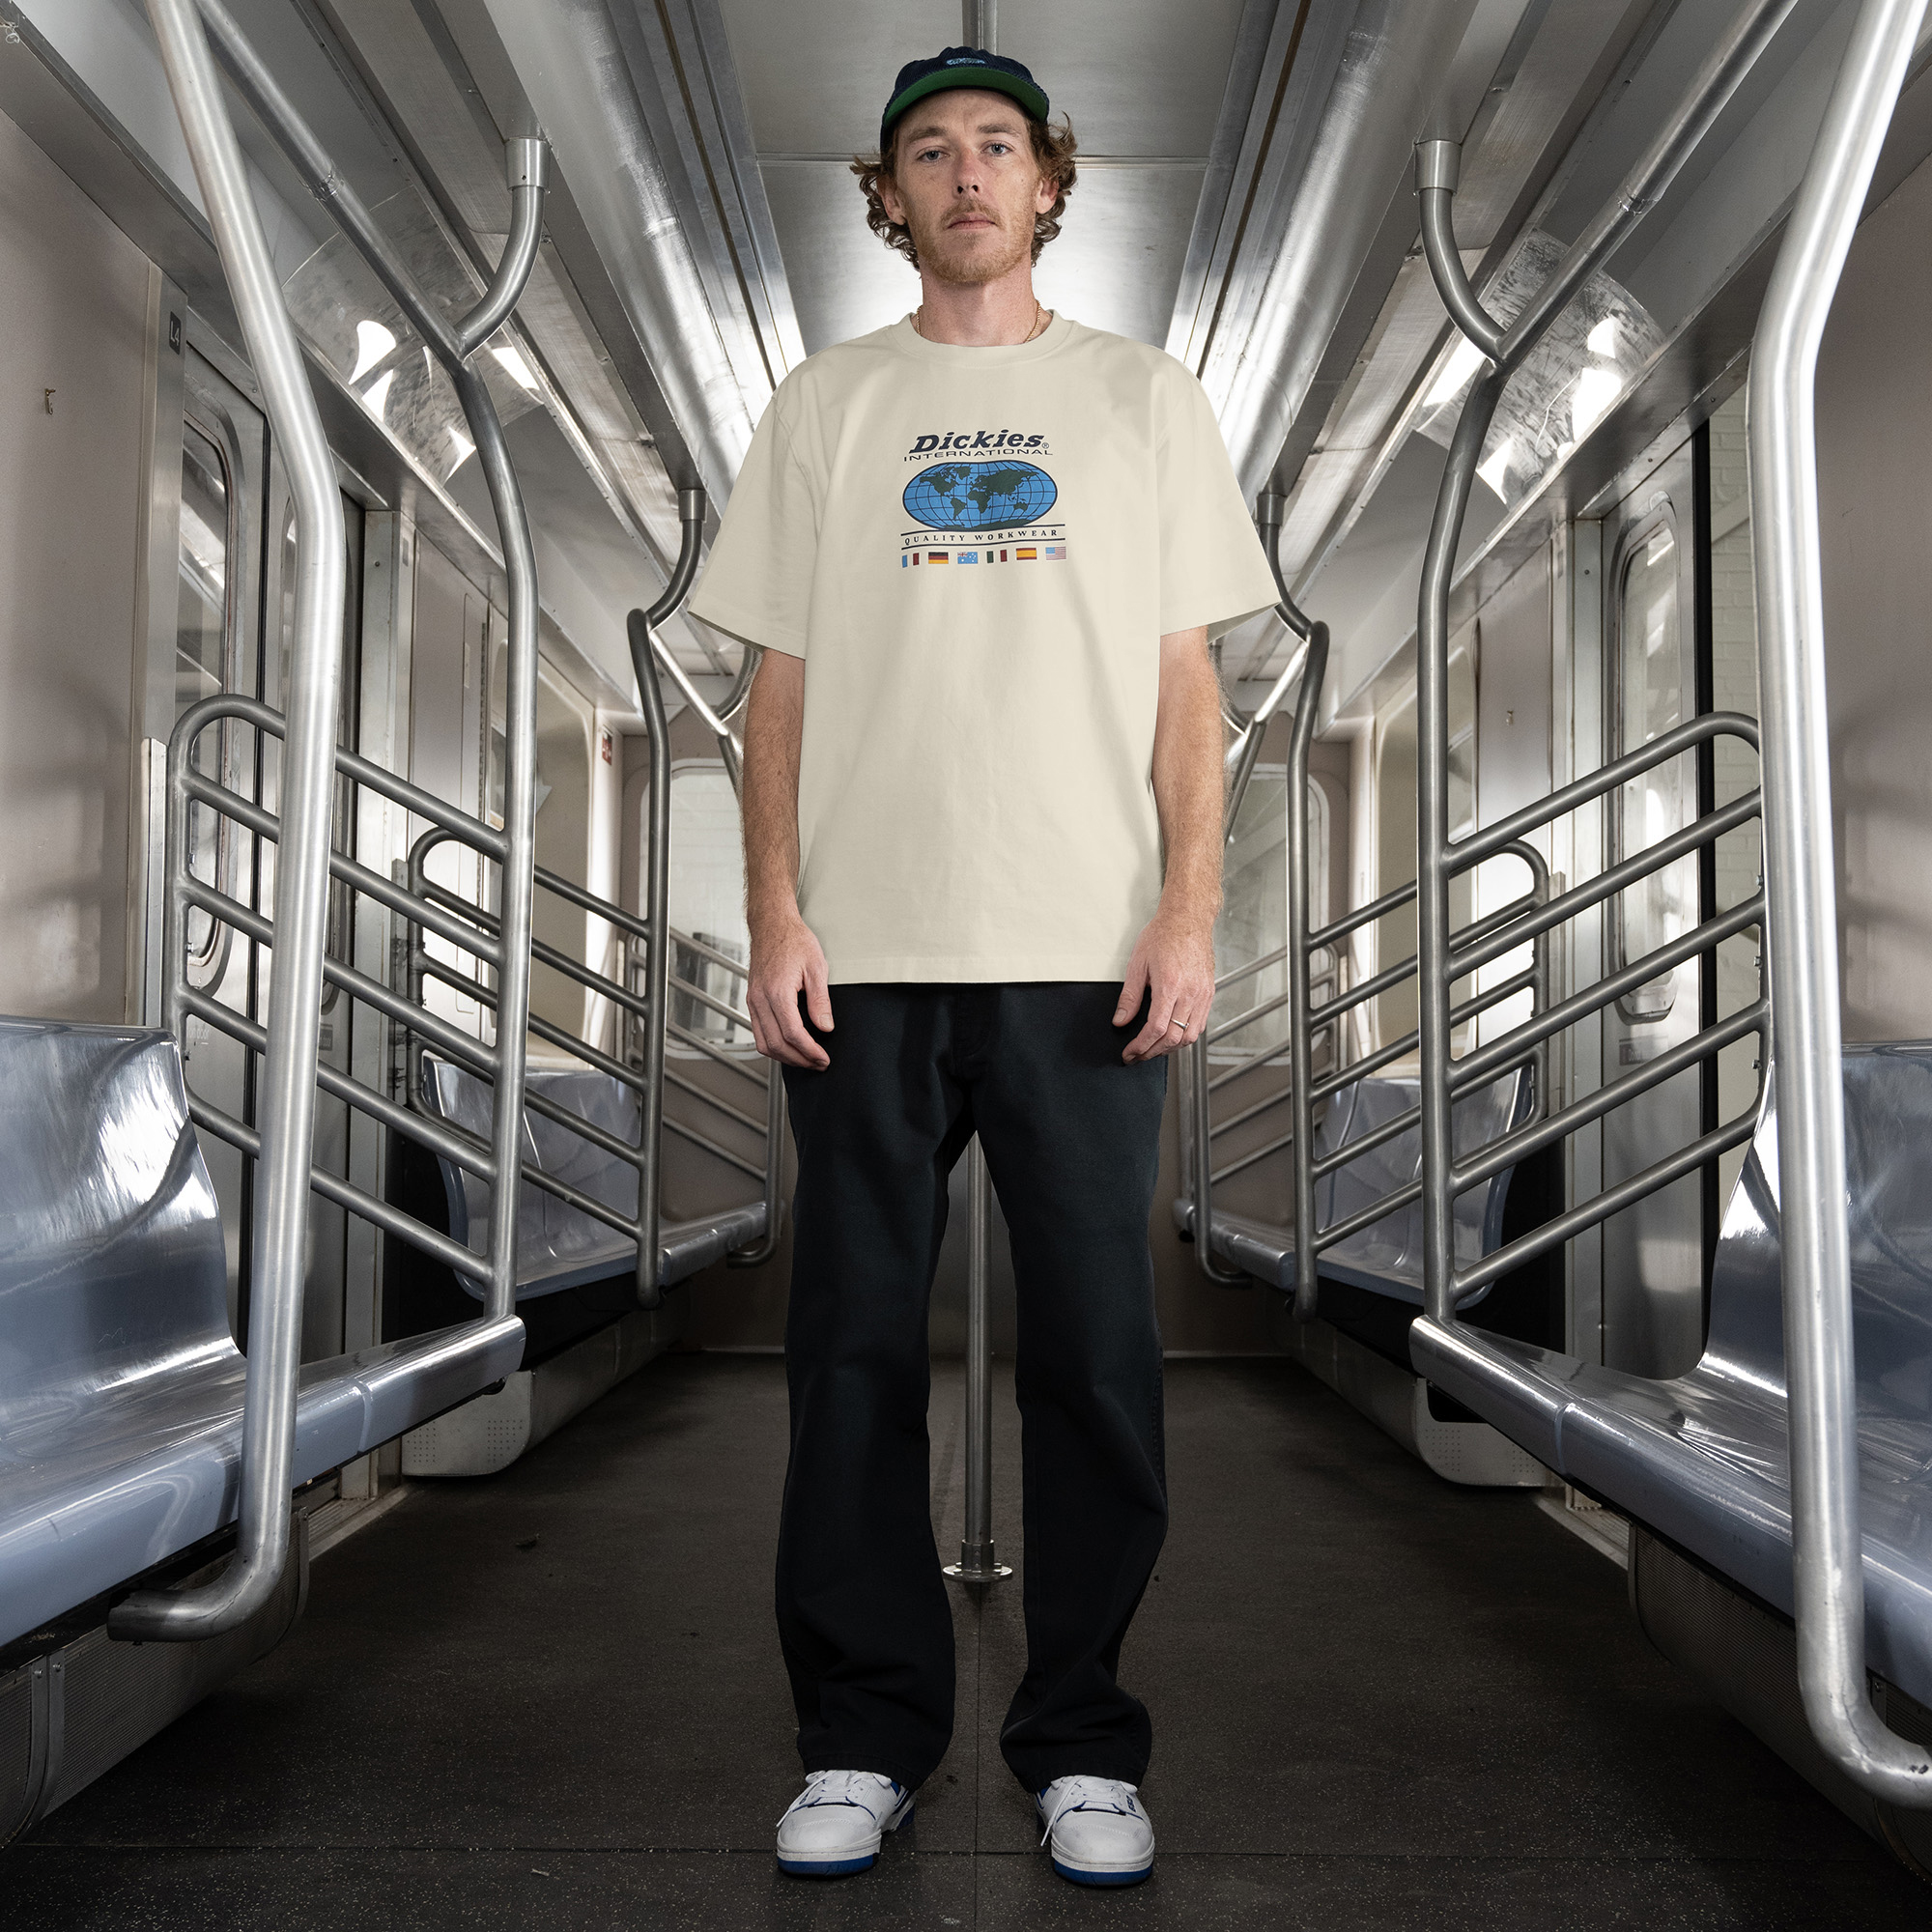 Jake Hayes グラフィック Tシャツ "Dickies Internaional” image number 11